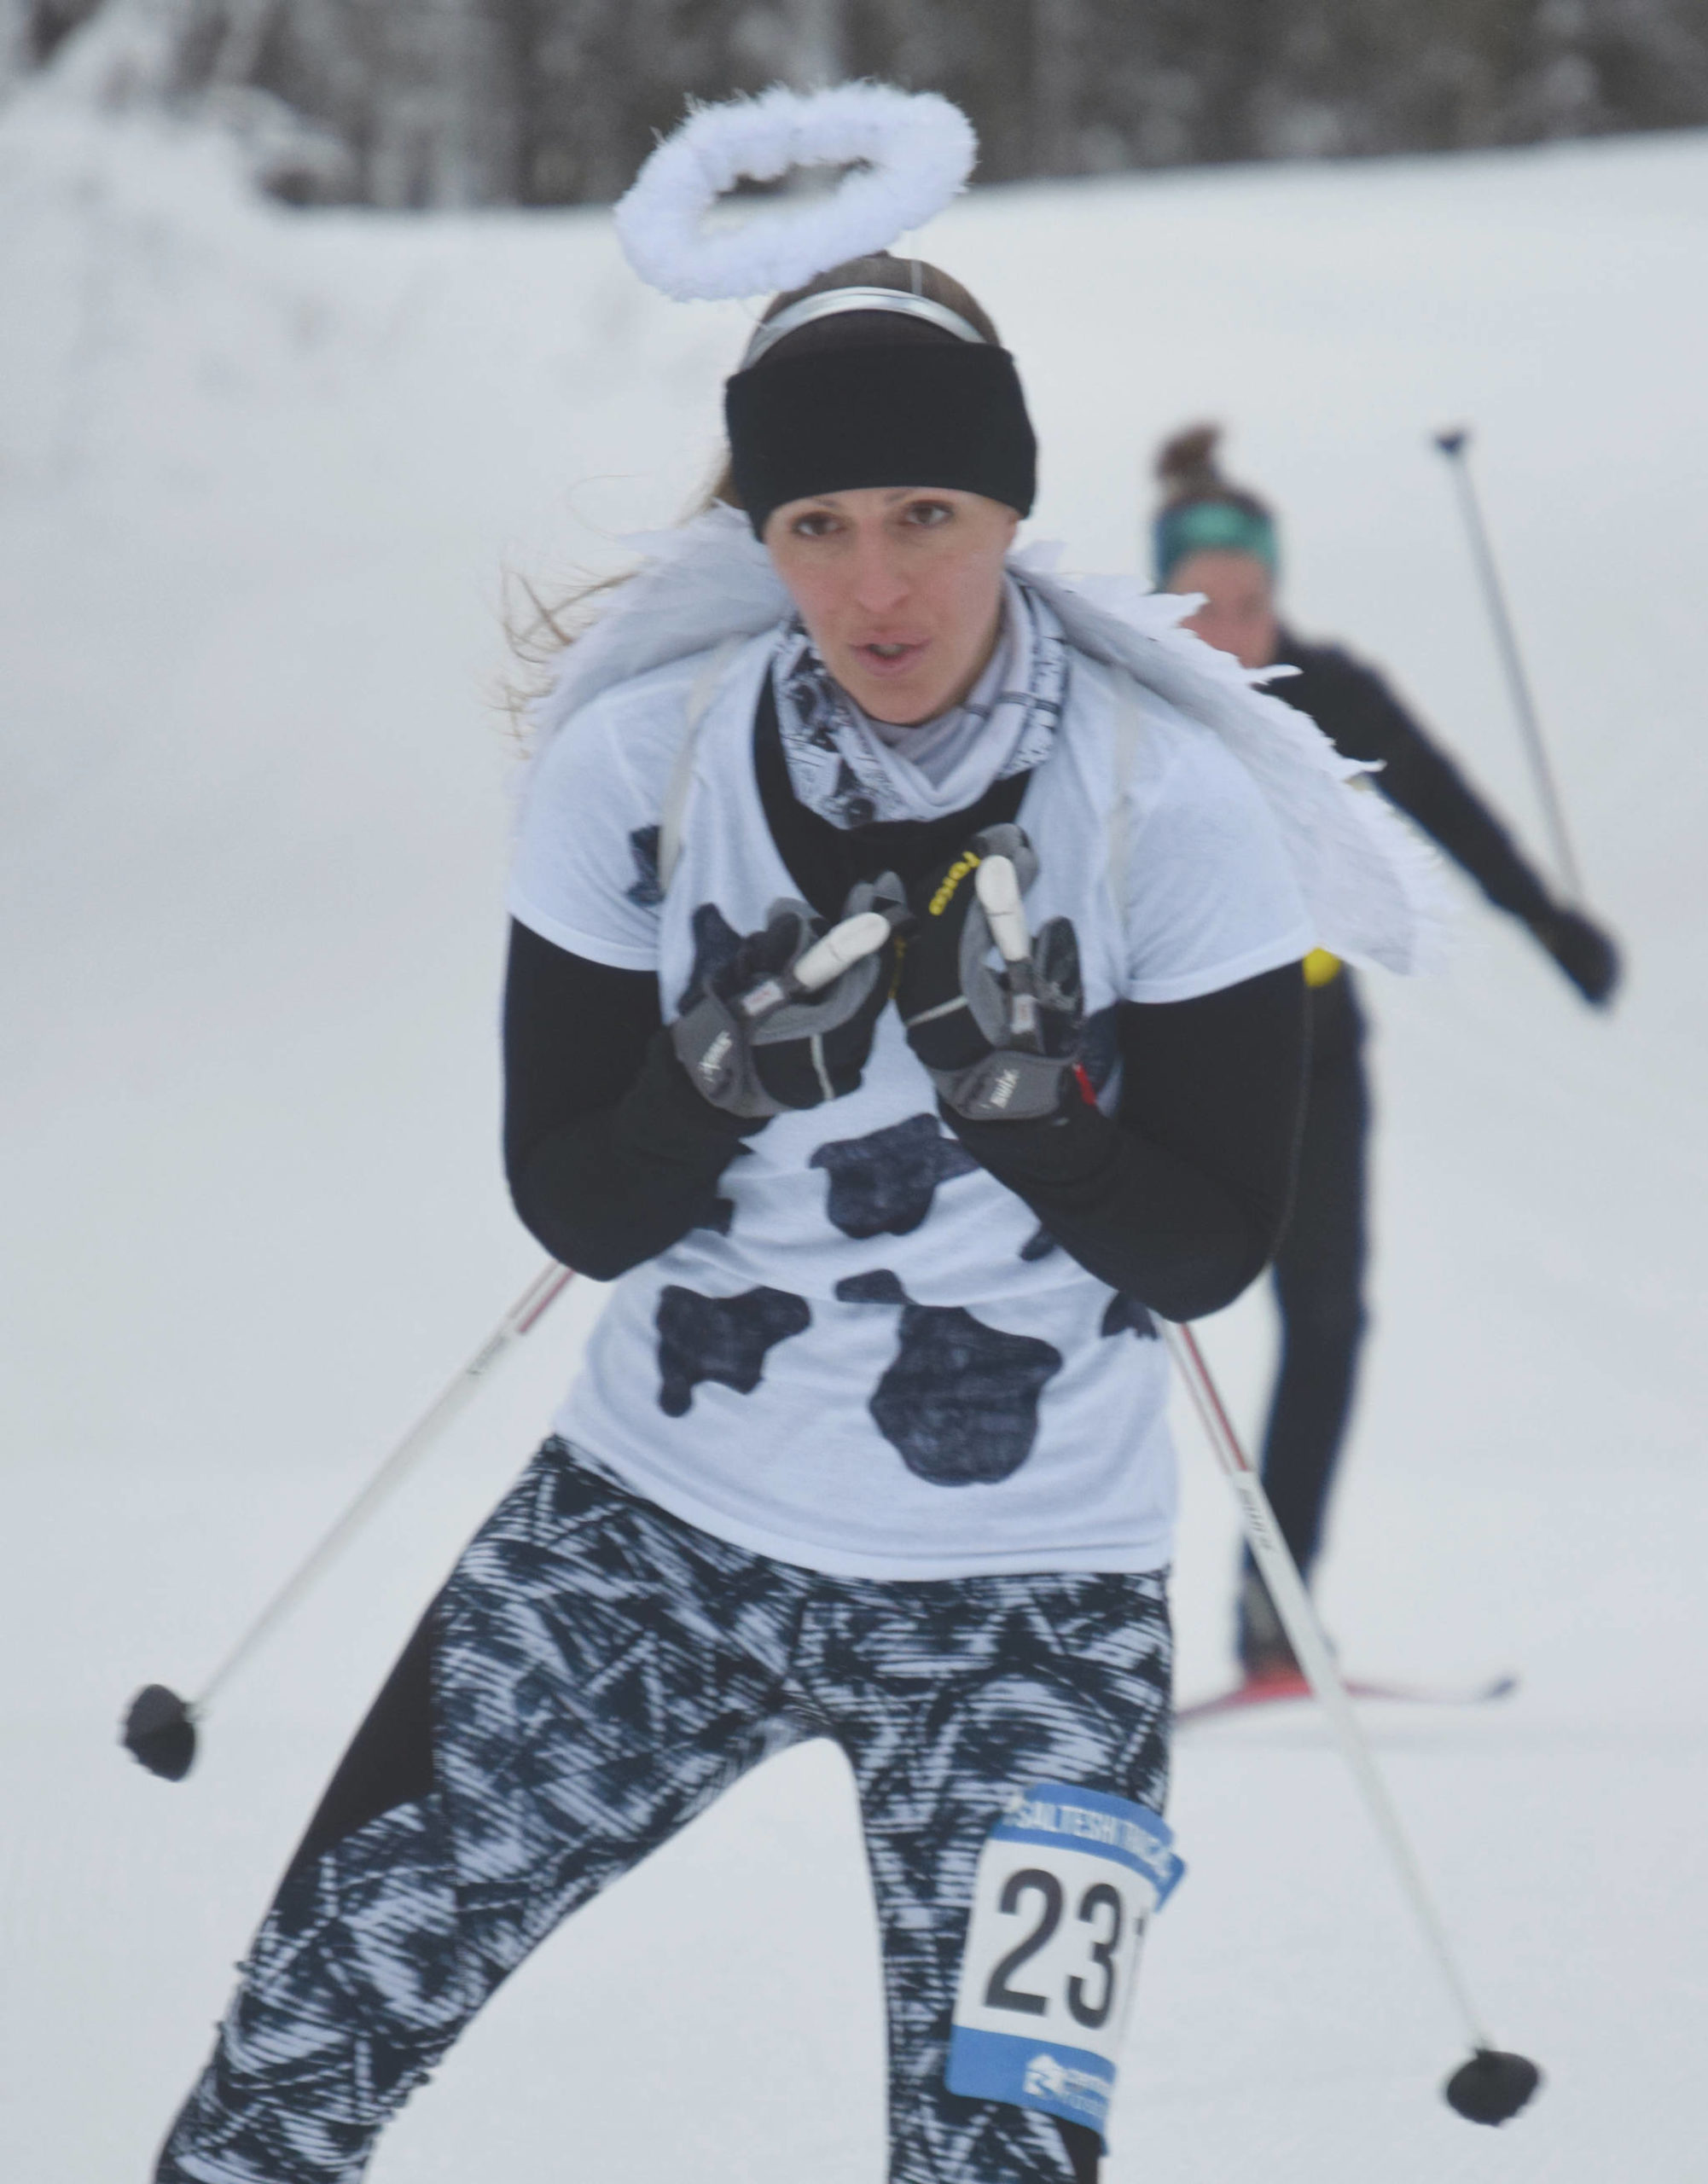 Sarah Foster competes dressed as a holy cow at the Ski for Women on Sunday, Feb. 2, 2020, at Tsalteshi Trails just outside of Soldotna, Alaska. (Photo by Jeff Helminiak/Peninsula Clarion)